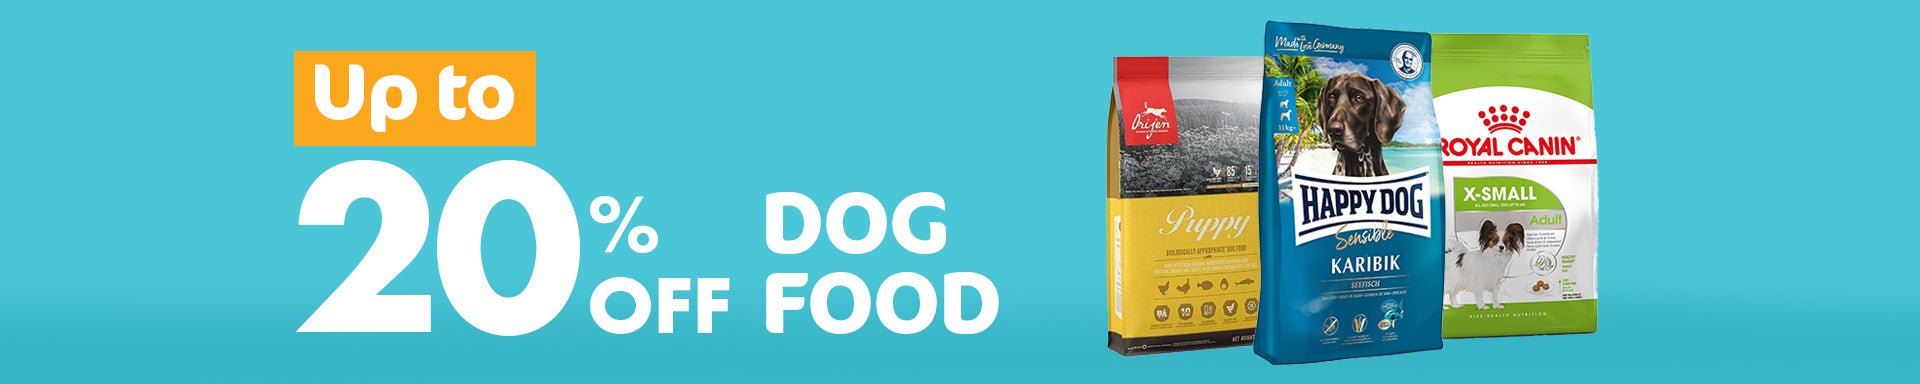 Dog food sale collection featuring various brands of dry, wet, and frozen dog food with up to 20% discount